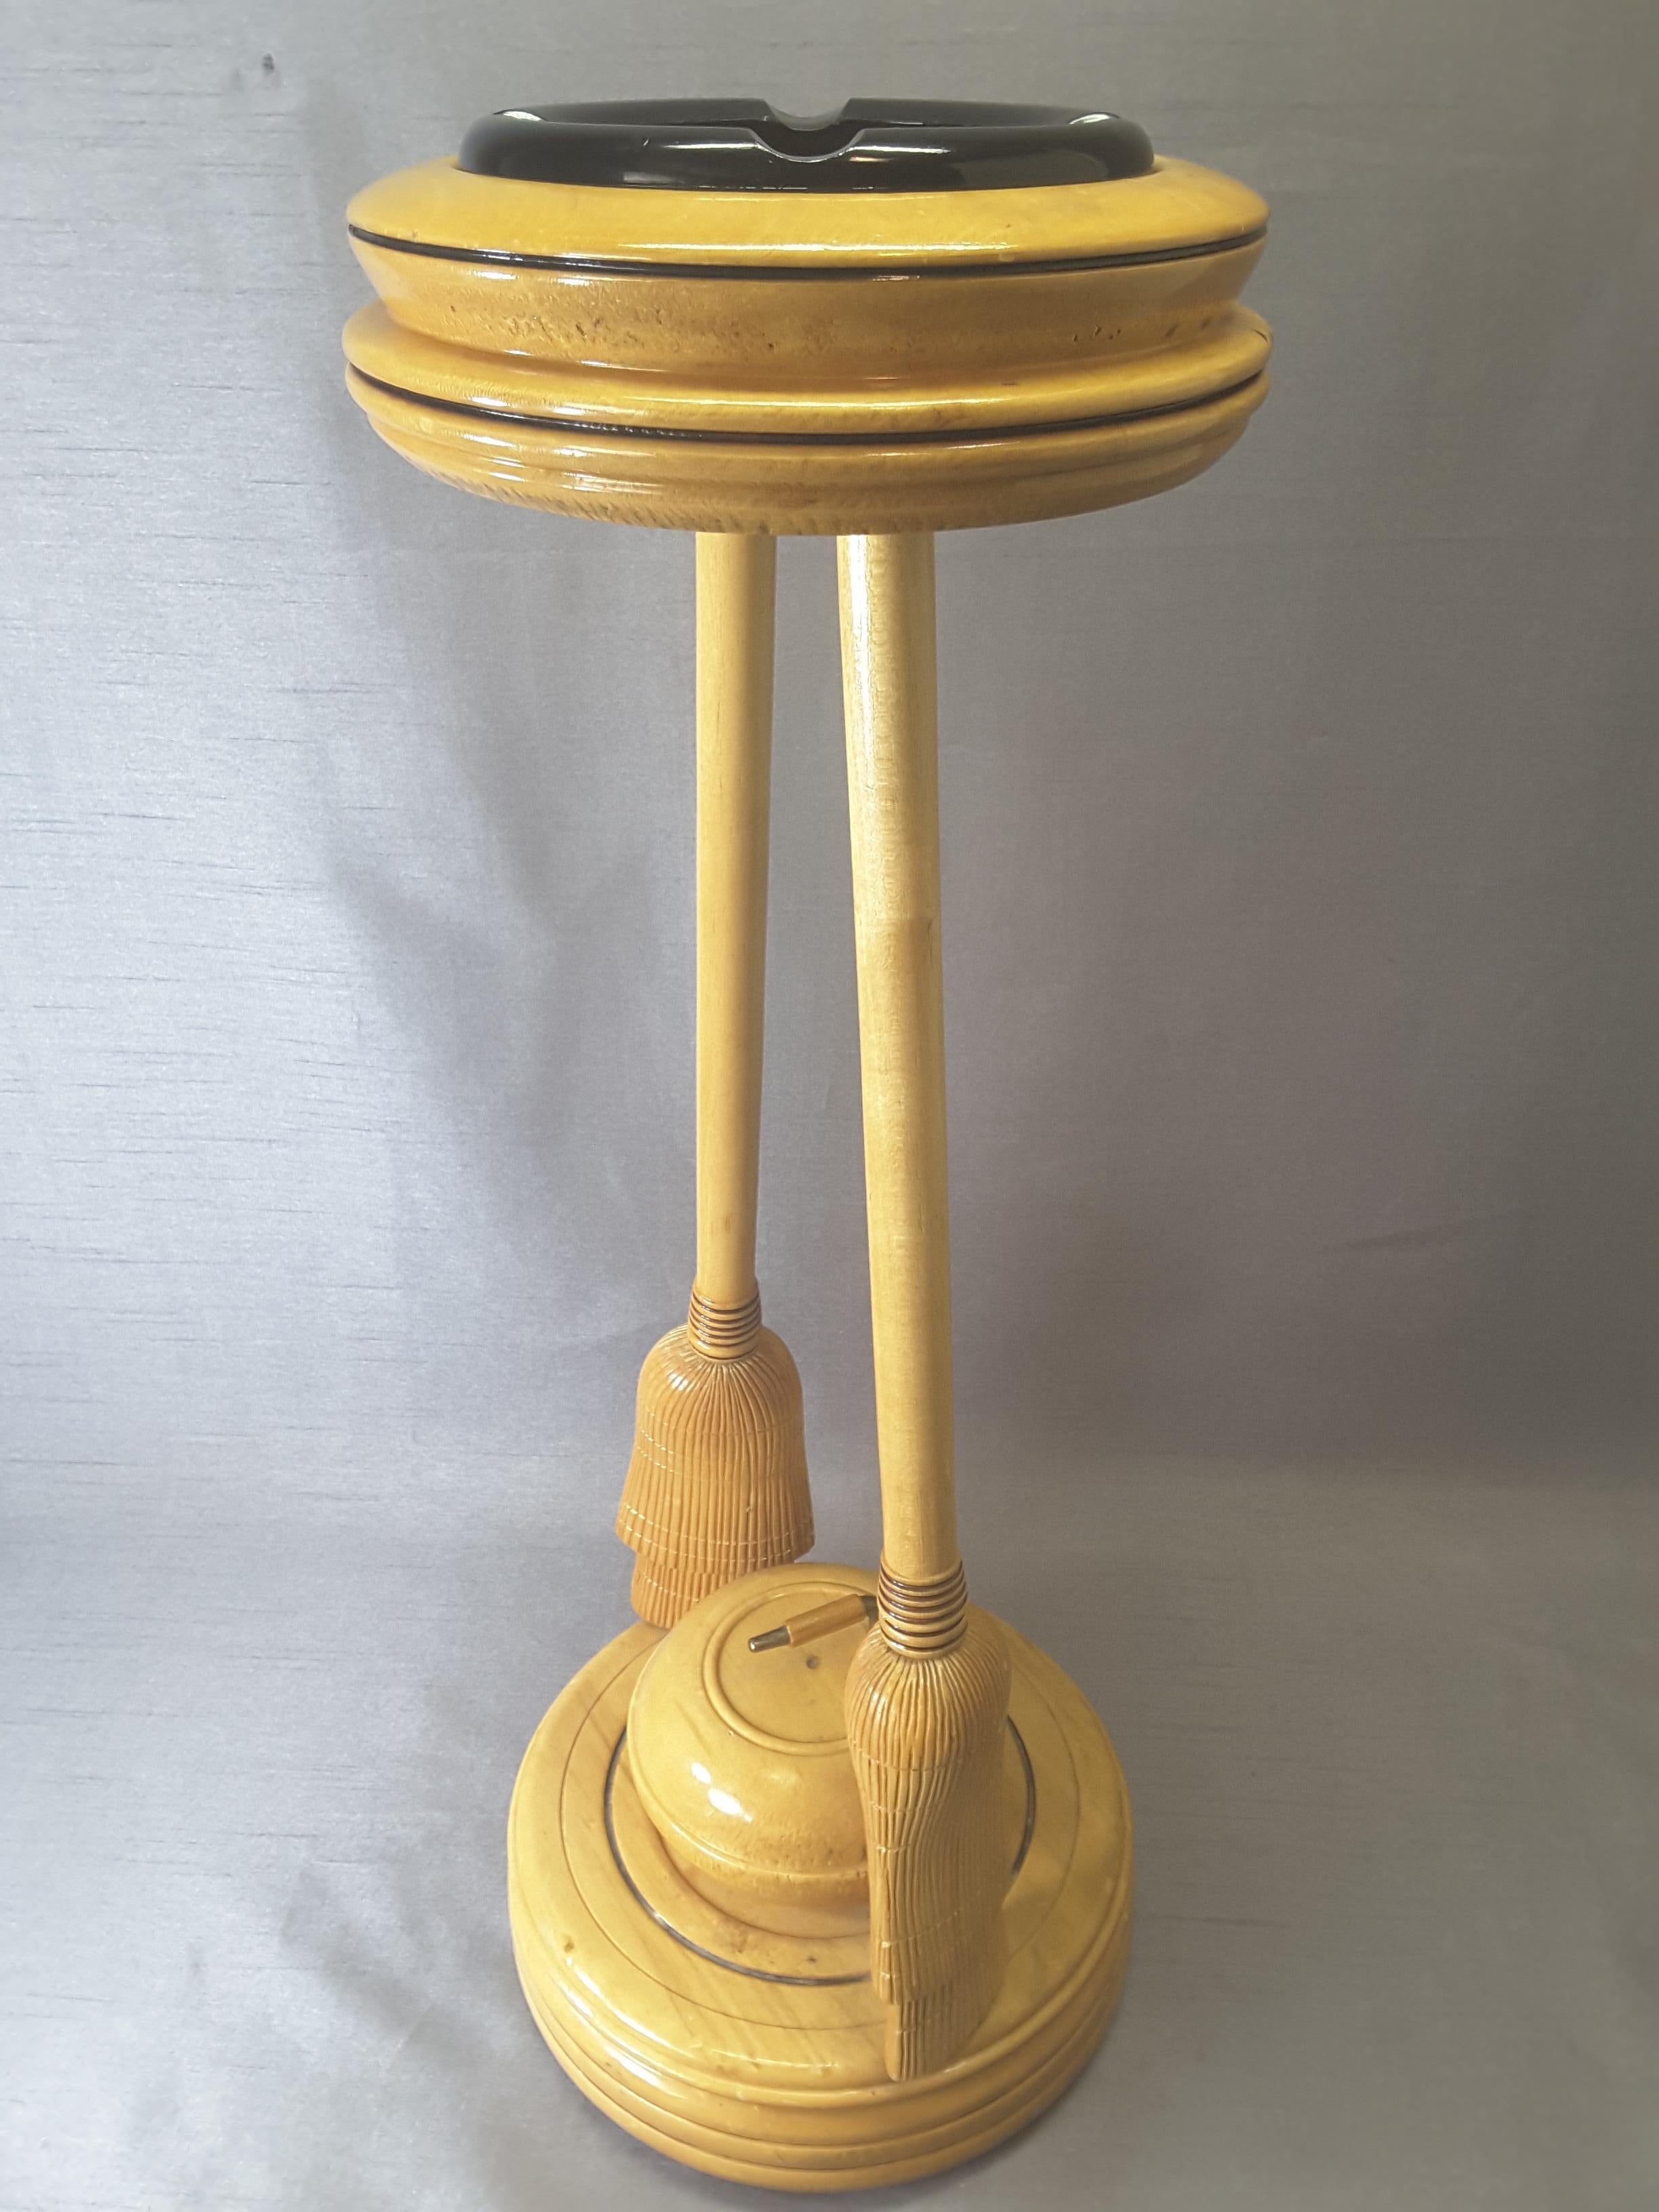 Curling Bonspiel trophy stand-up ashtray, early 1960s, The stand is maple with two curling brooms holding the top ashtray with the base mounted on a turned base and centered by a curling stone. The stand is made of maple, with a black glass ashtray.